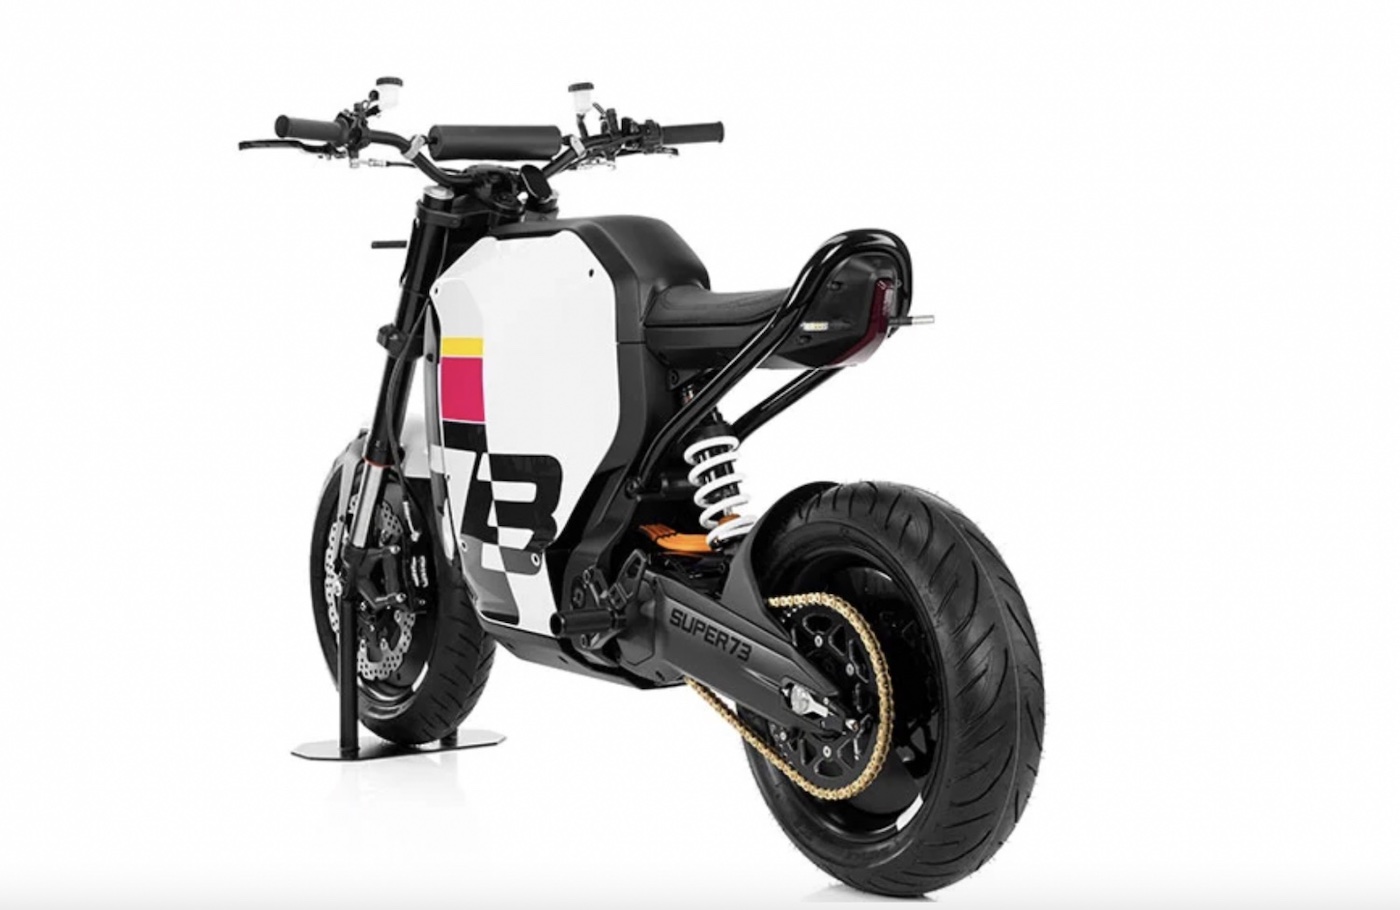 A view of the all-new SUPER73 C1X concept electric motorbike - a small-displacement machine meant to live in the grey zone between electric bicycle and electric motorcycle.